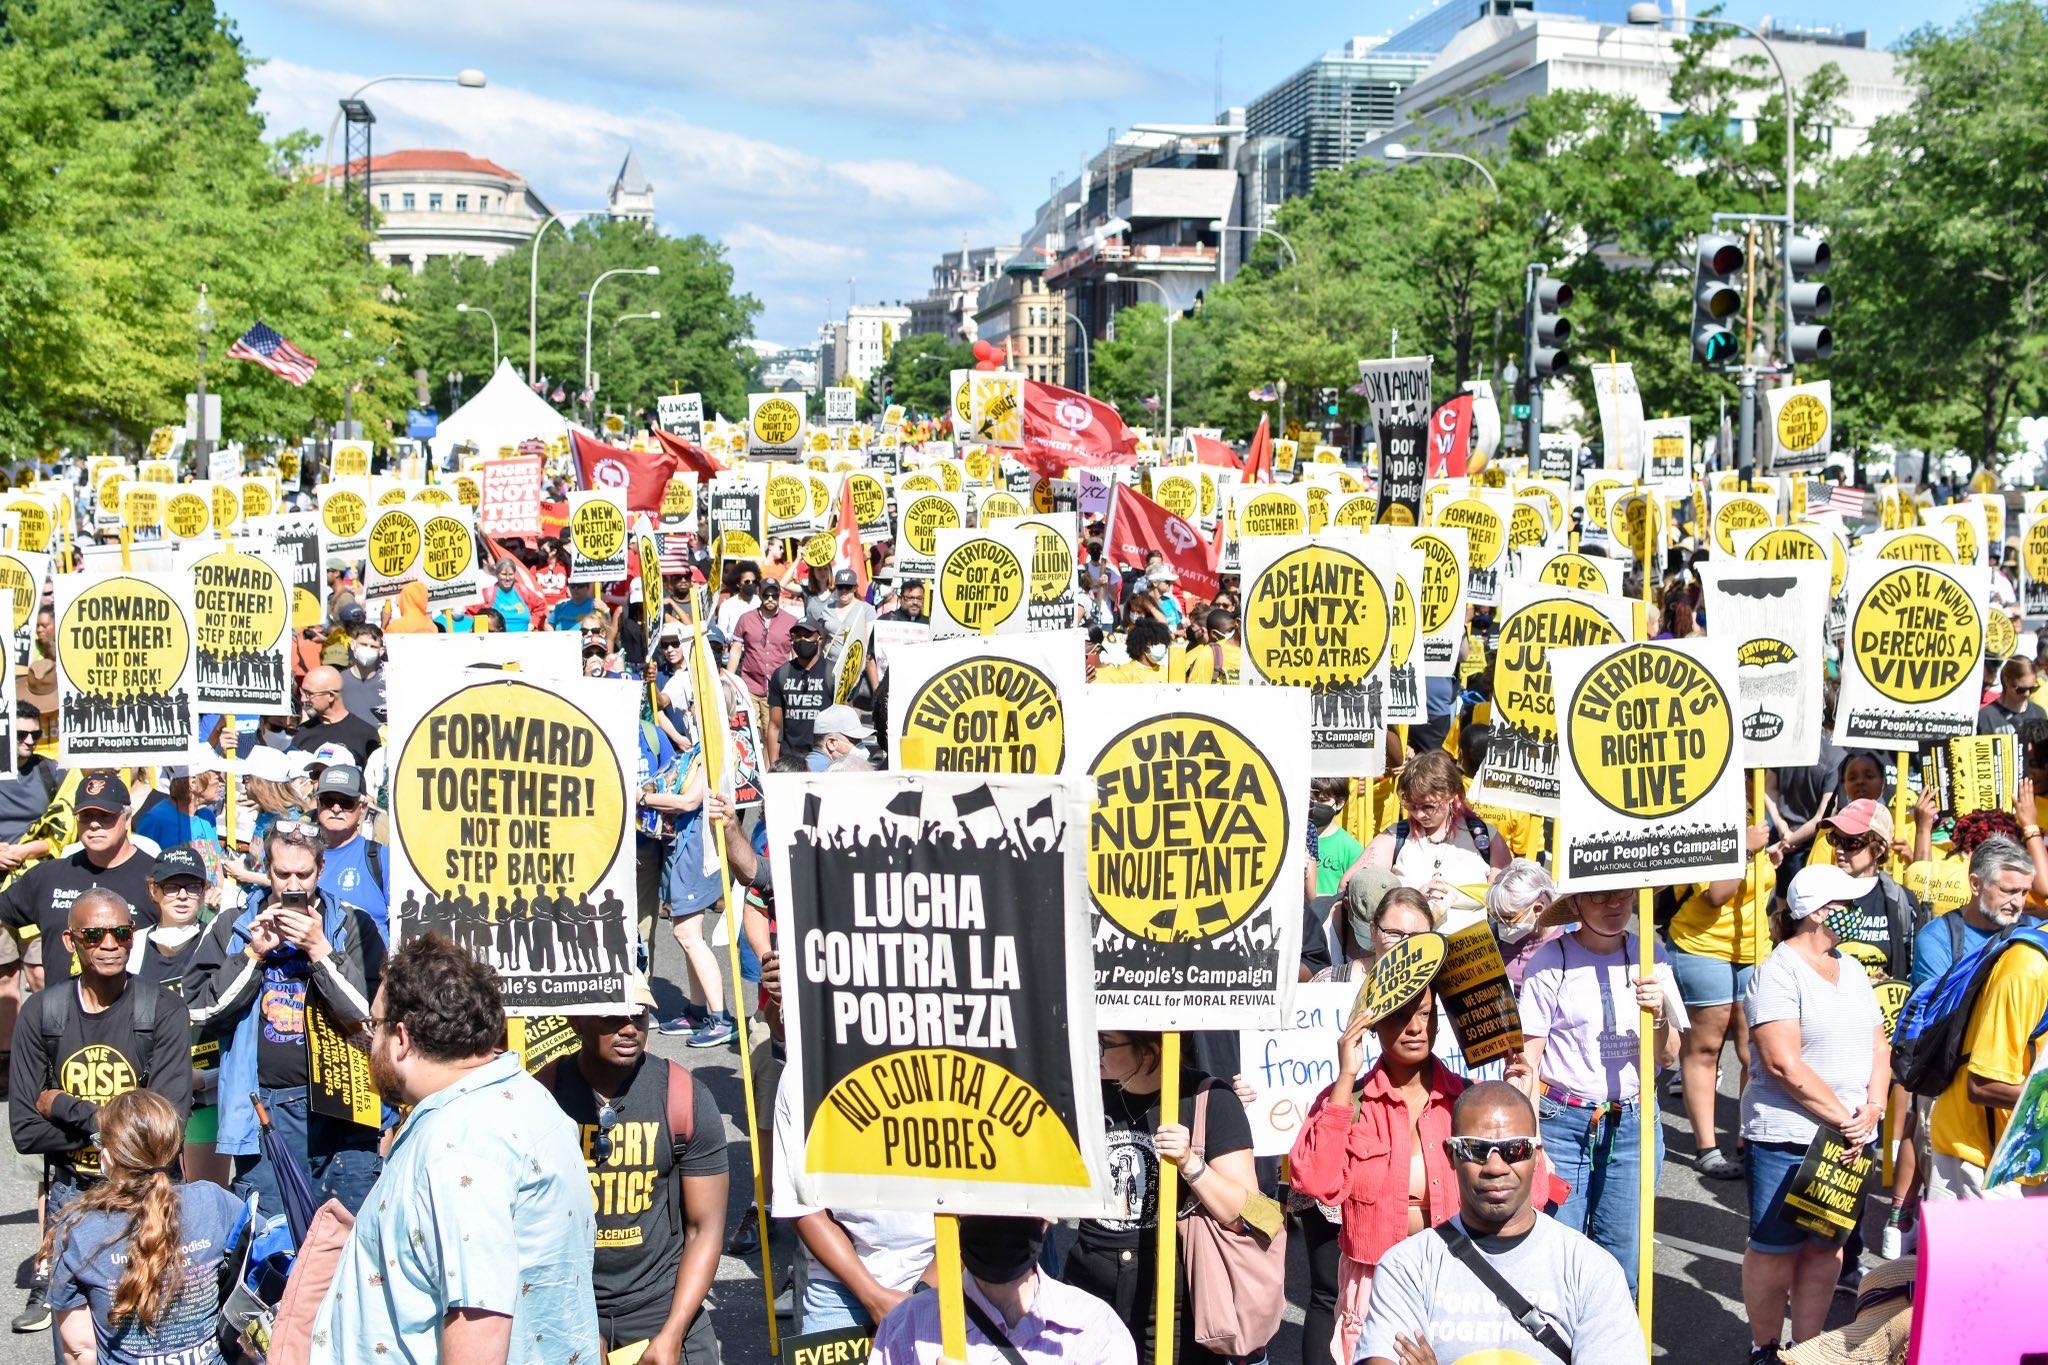 Photo of crowd filling the street on June 18, many holding Poor People's Campaign signs in yellow, black and white with slogans like Forward Together, Lucha Contra La Pobreza, Everybody Has the Right to Live.